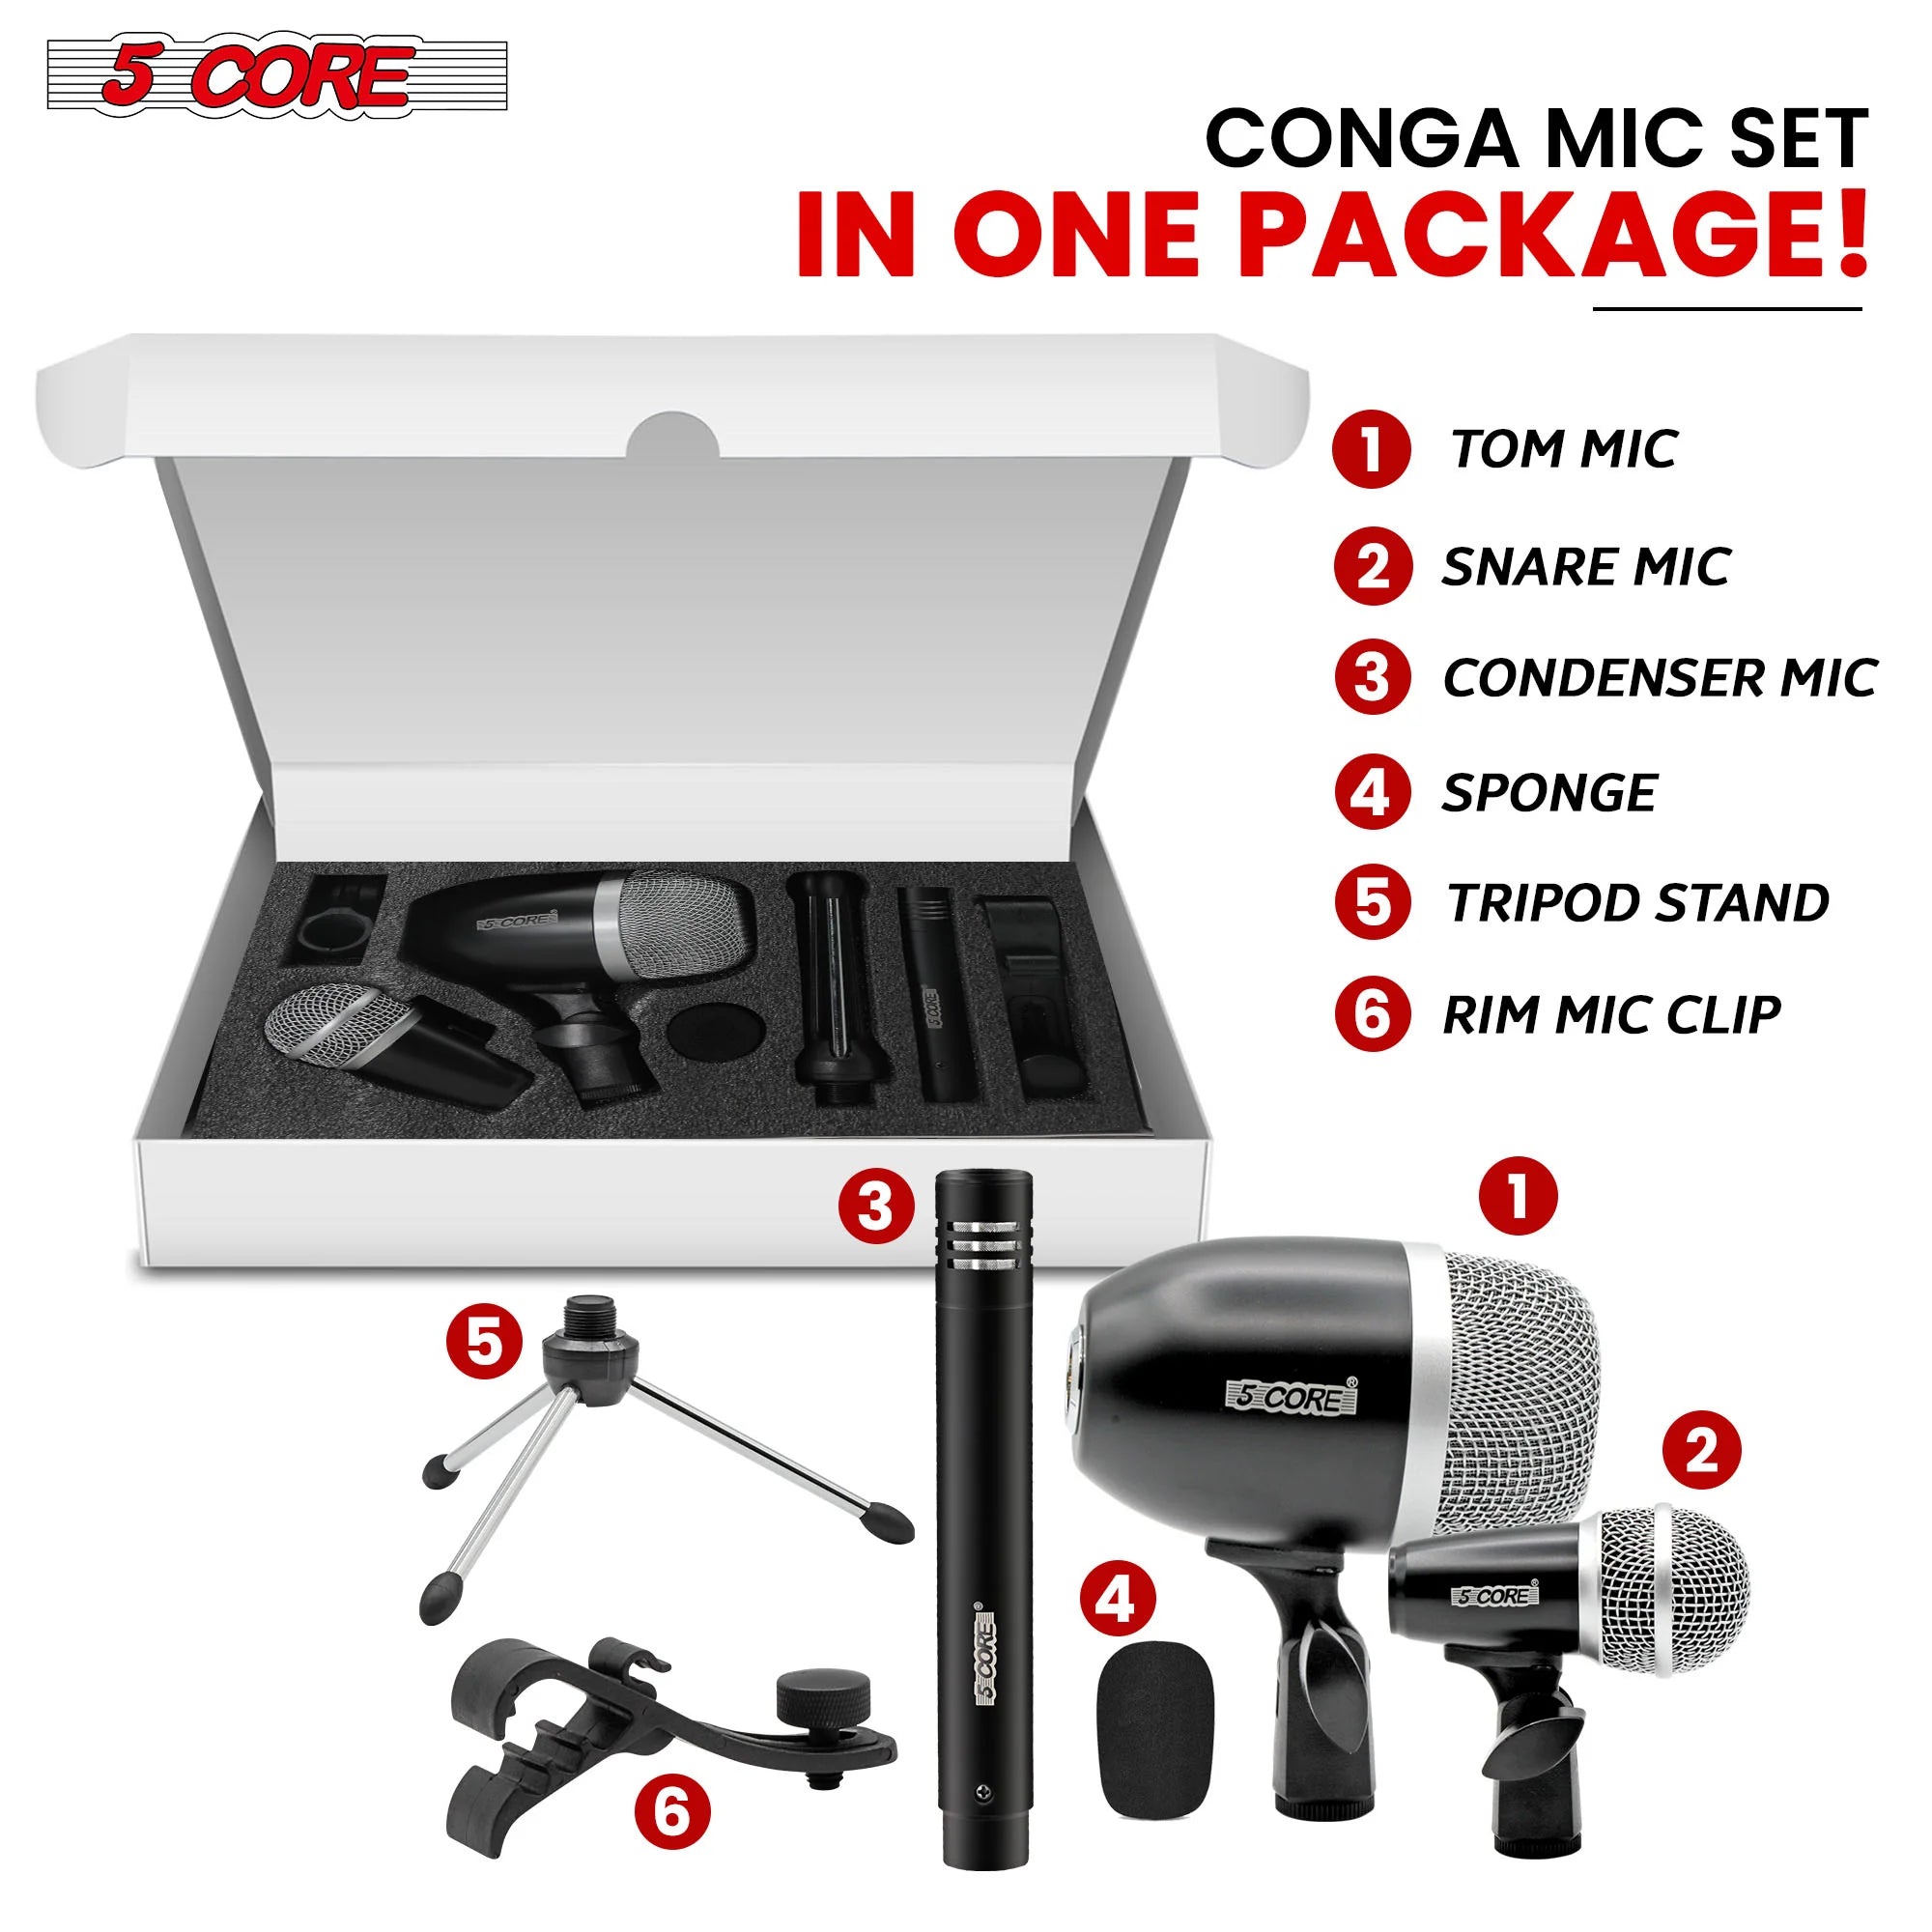 5Core Conga Mic Snare Tom Cardioid Dynamic Microphone for Drummer Precision Instrument